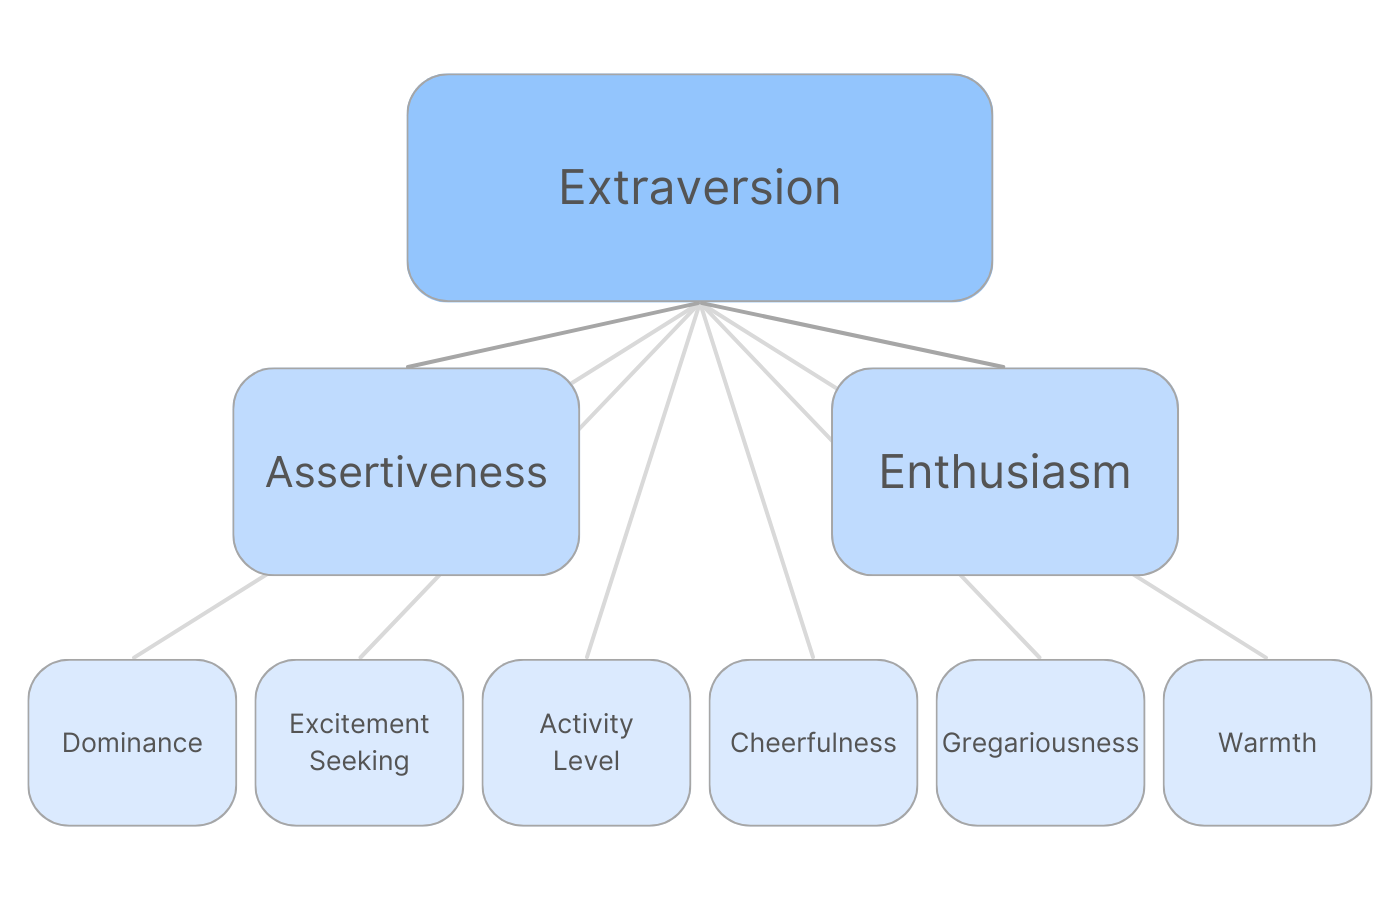 The Extraversion dimension and its aspects and facets